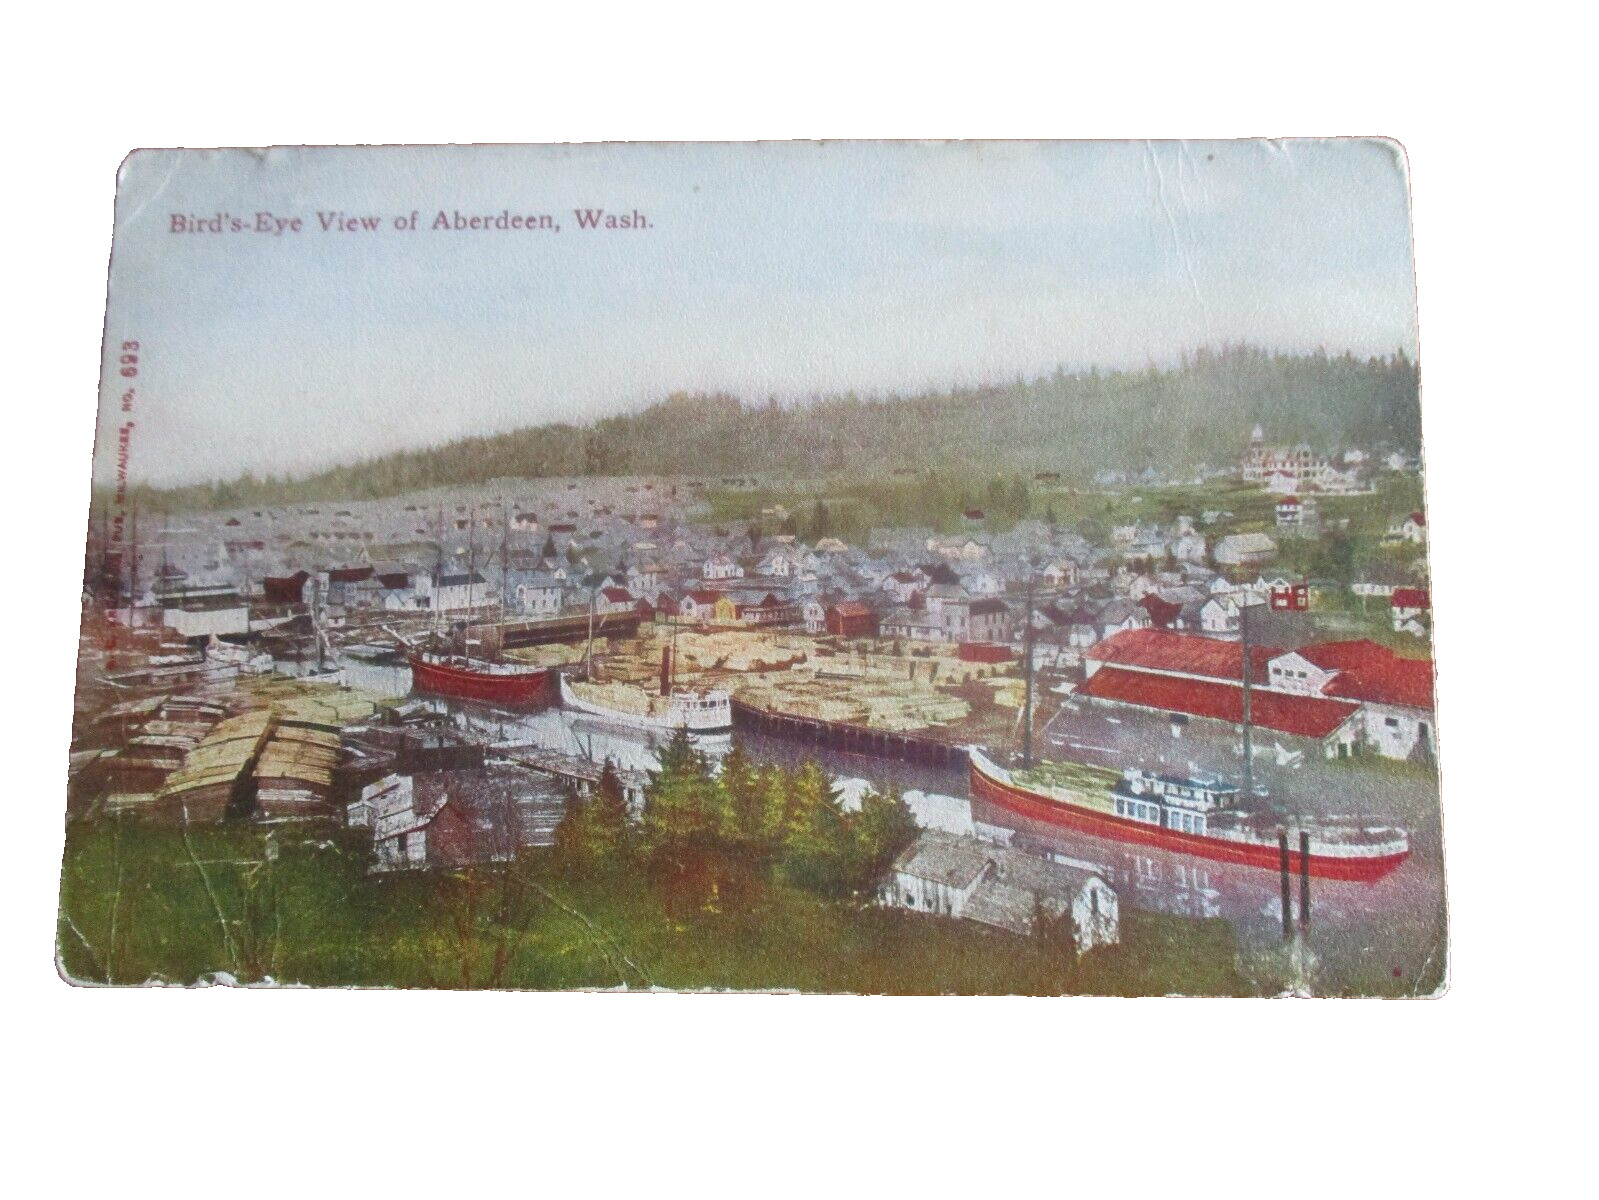 Aberdeen, Wash. Postcard Unposted Ships Loaded with Lumber